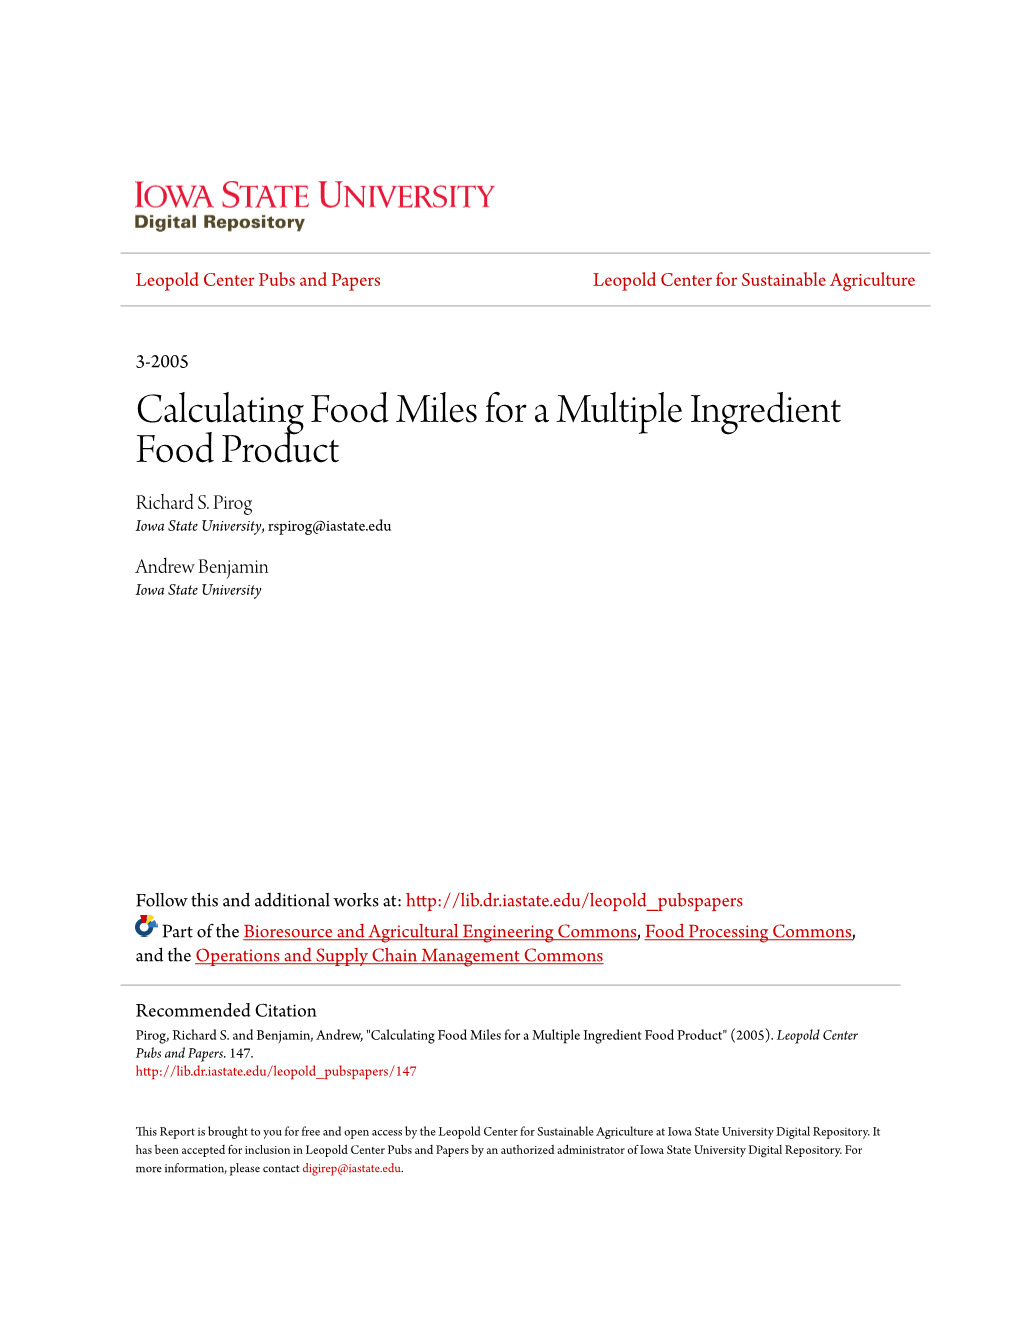 Calculating Food Miles for a Multiple Ingredient Food Product Richard S